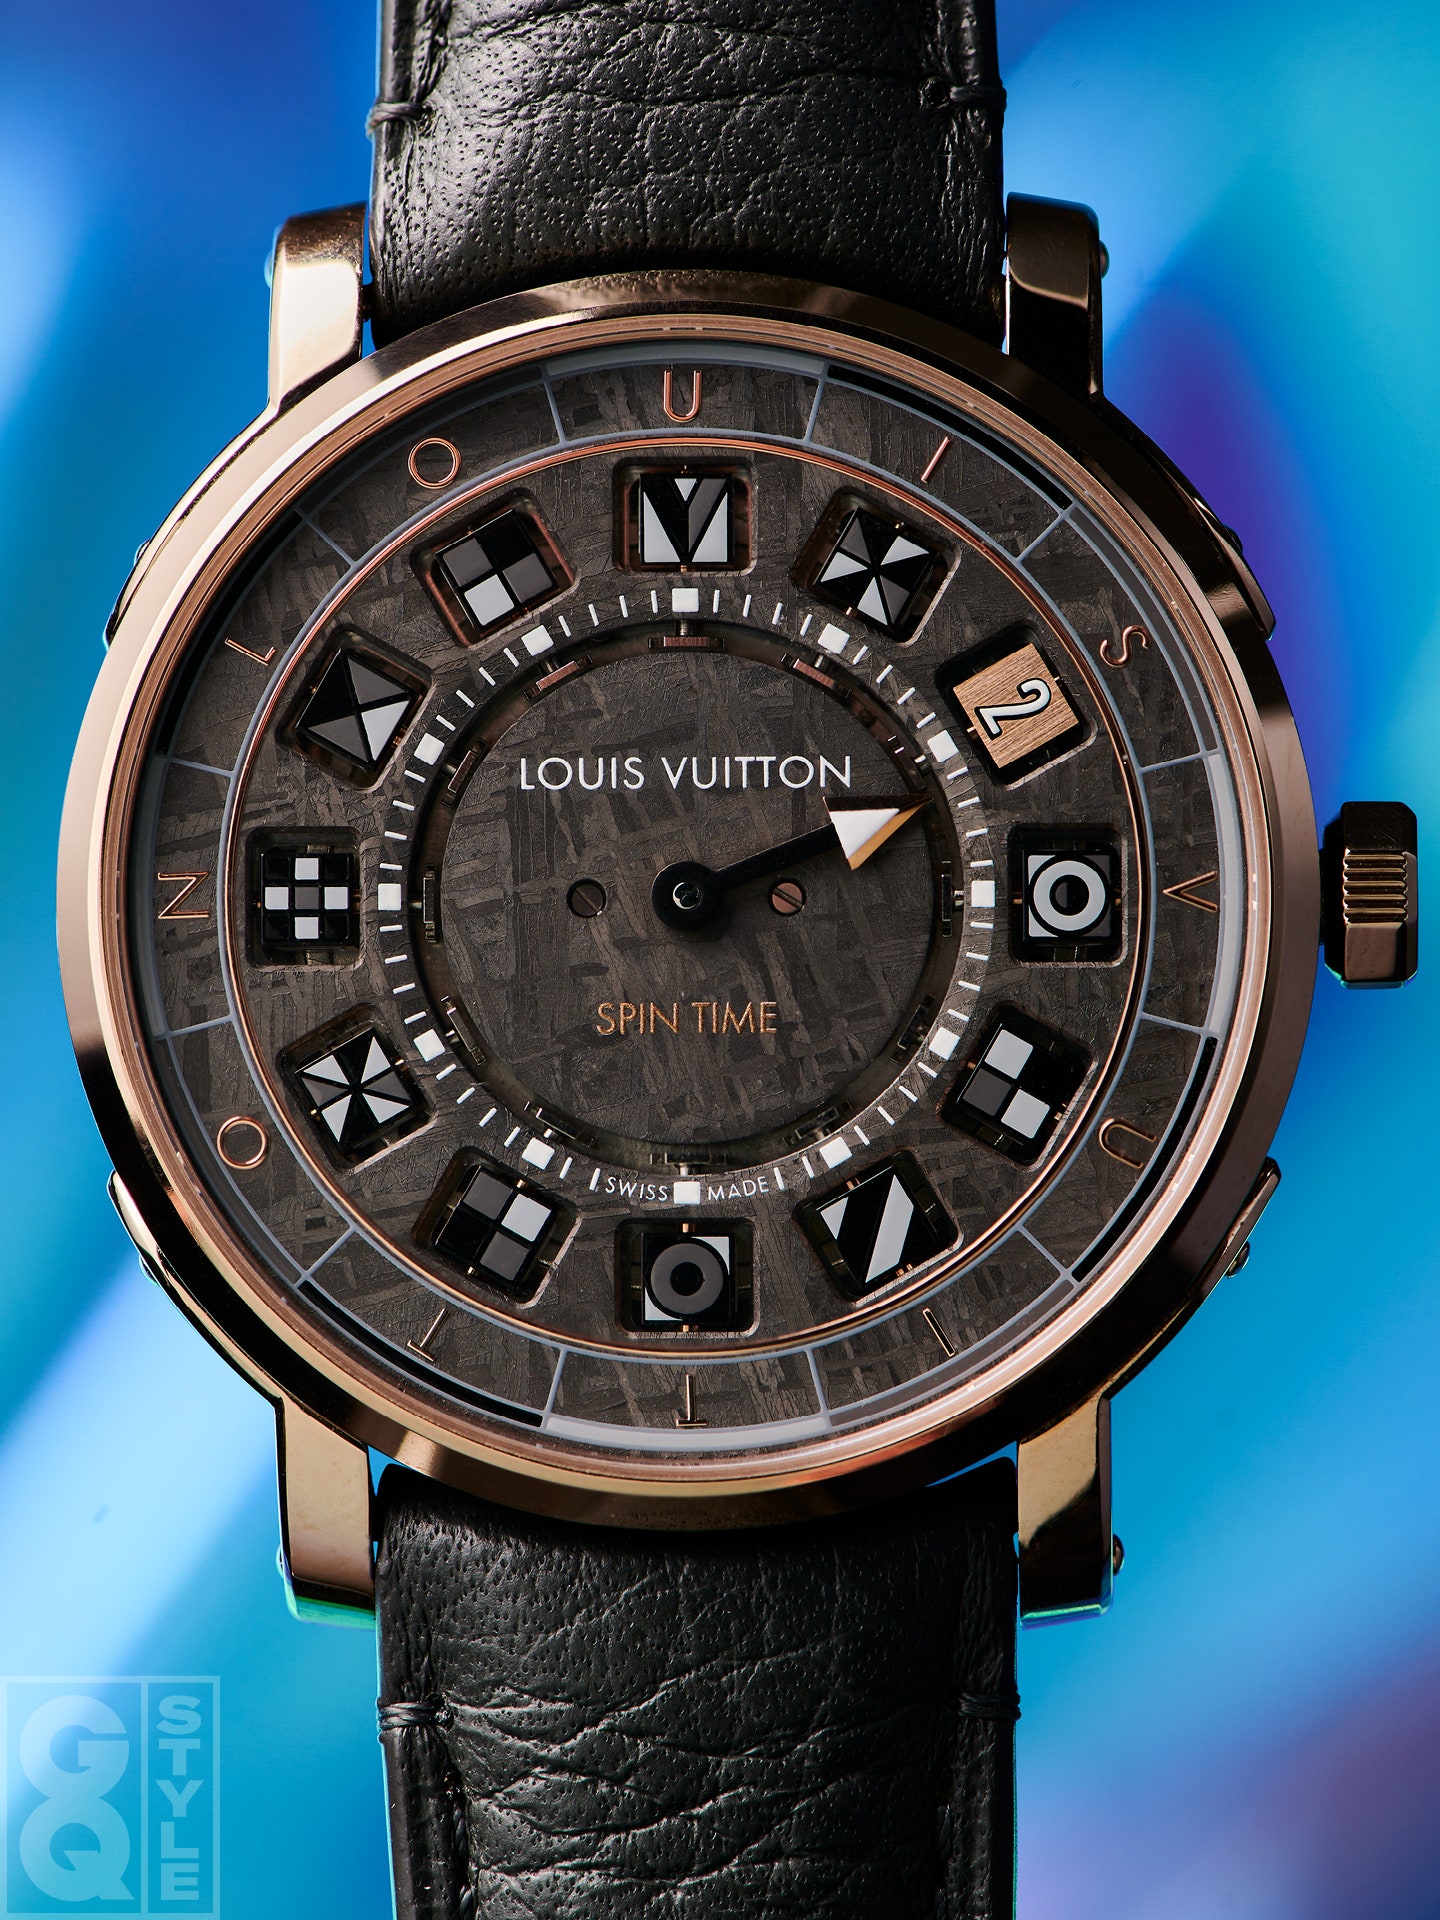 GQ Style gold watches Louis Vuitton